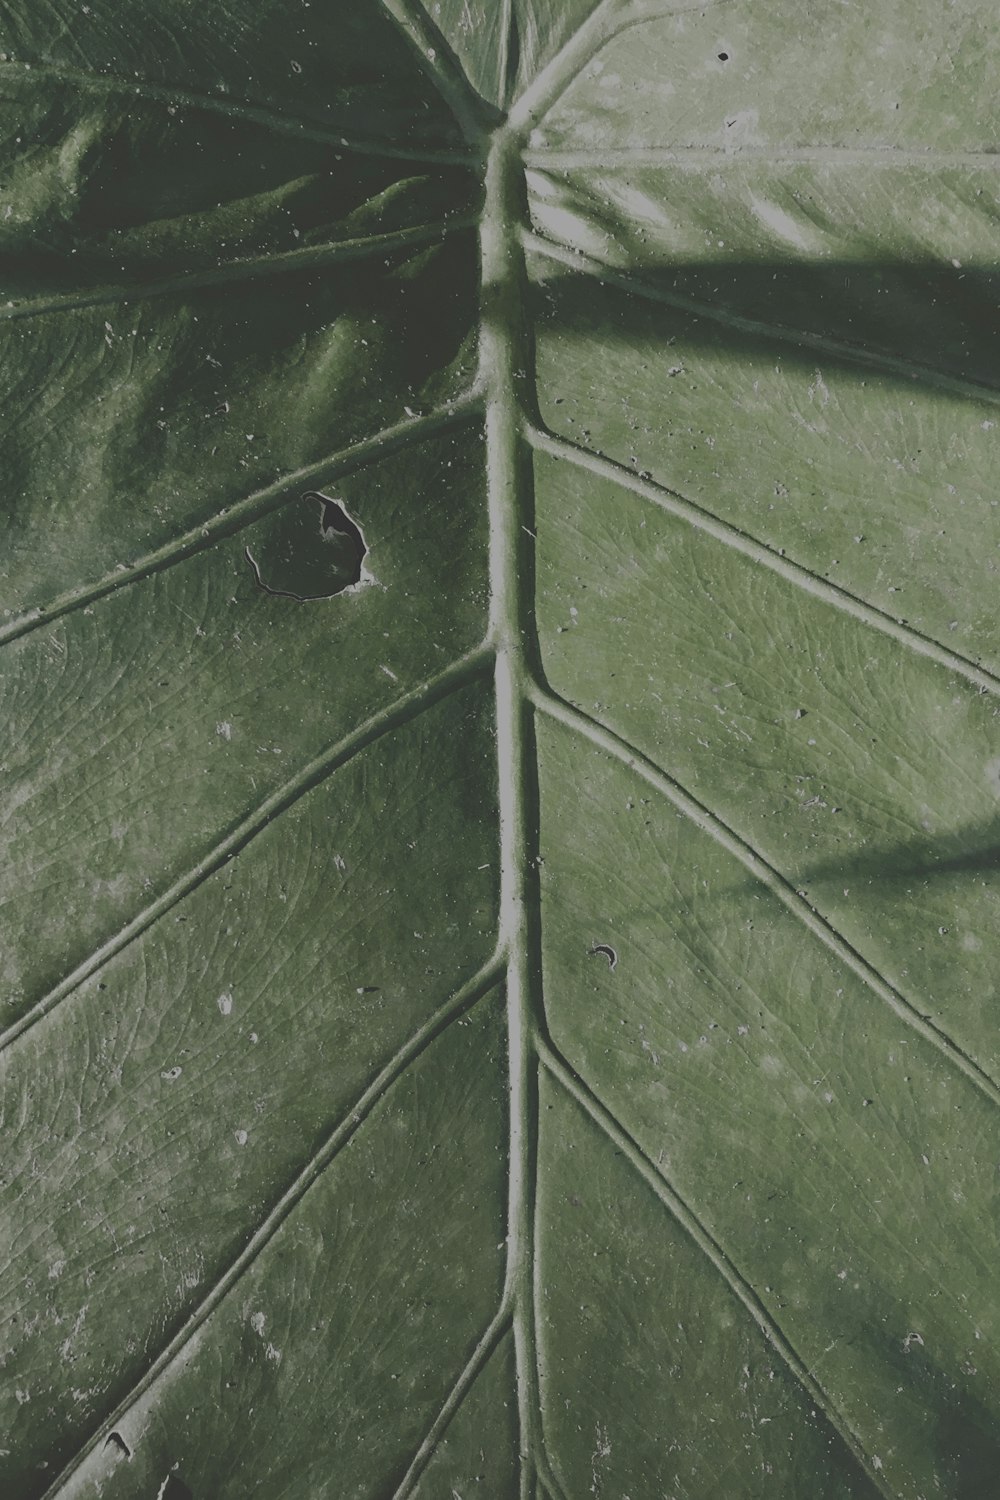 a close up of a green leaf with holes in it